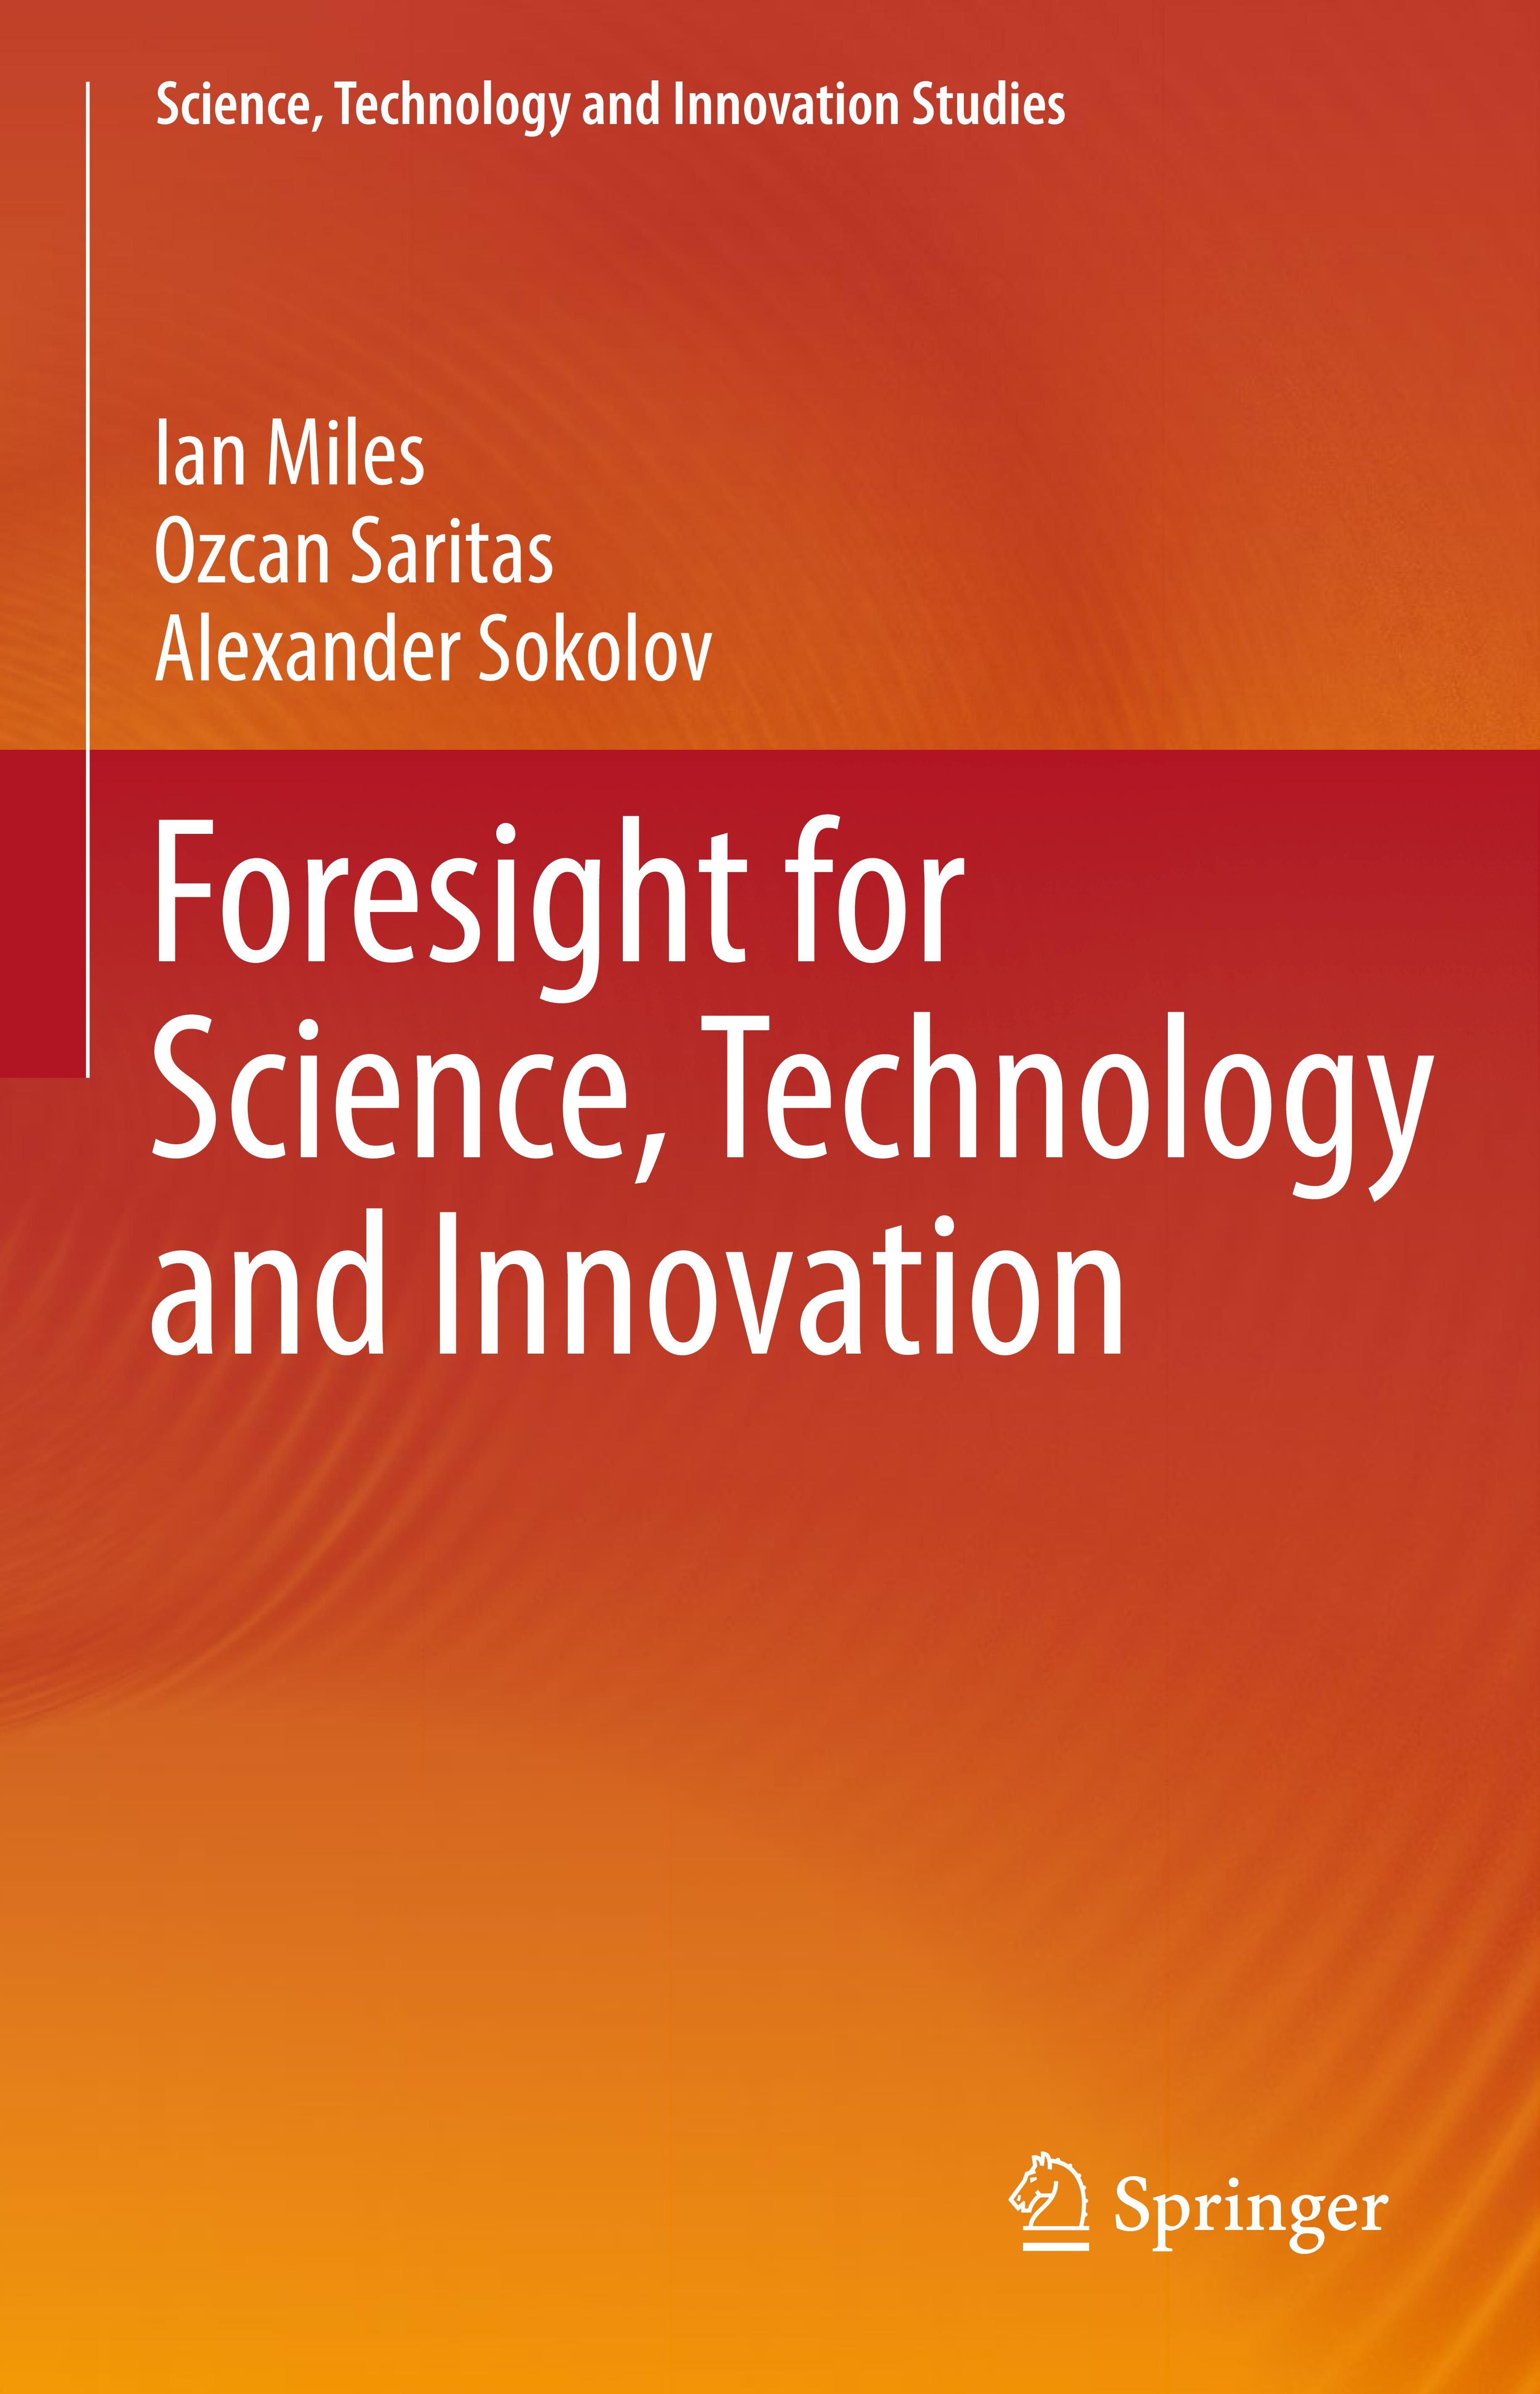 Foresight for Science Technology and Innovation